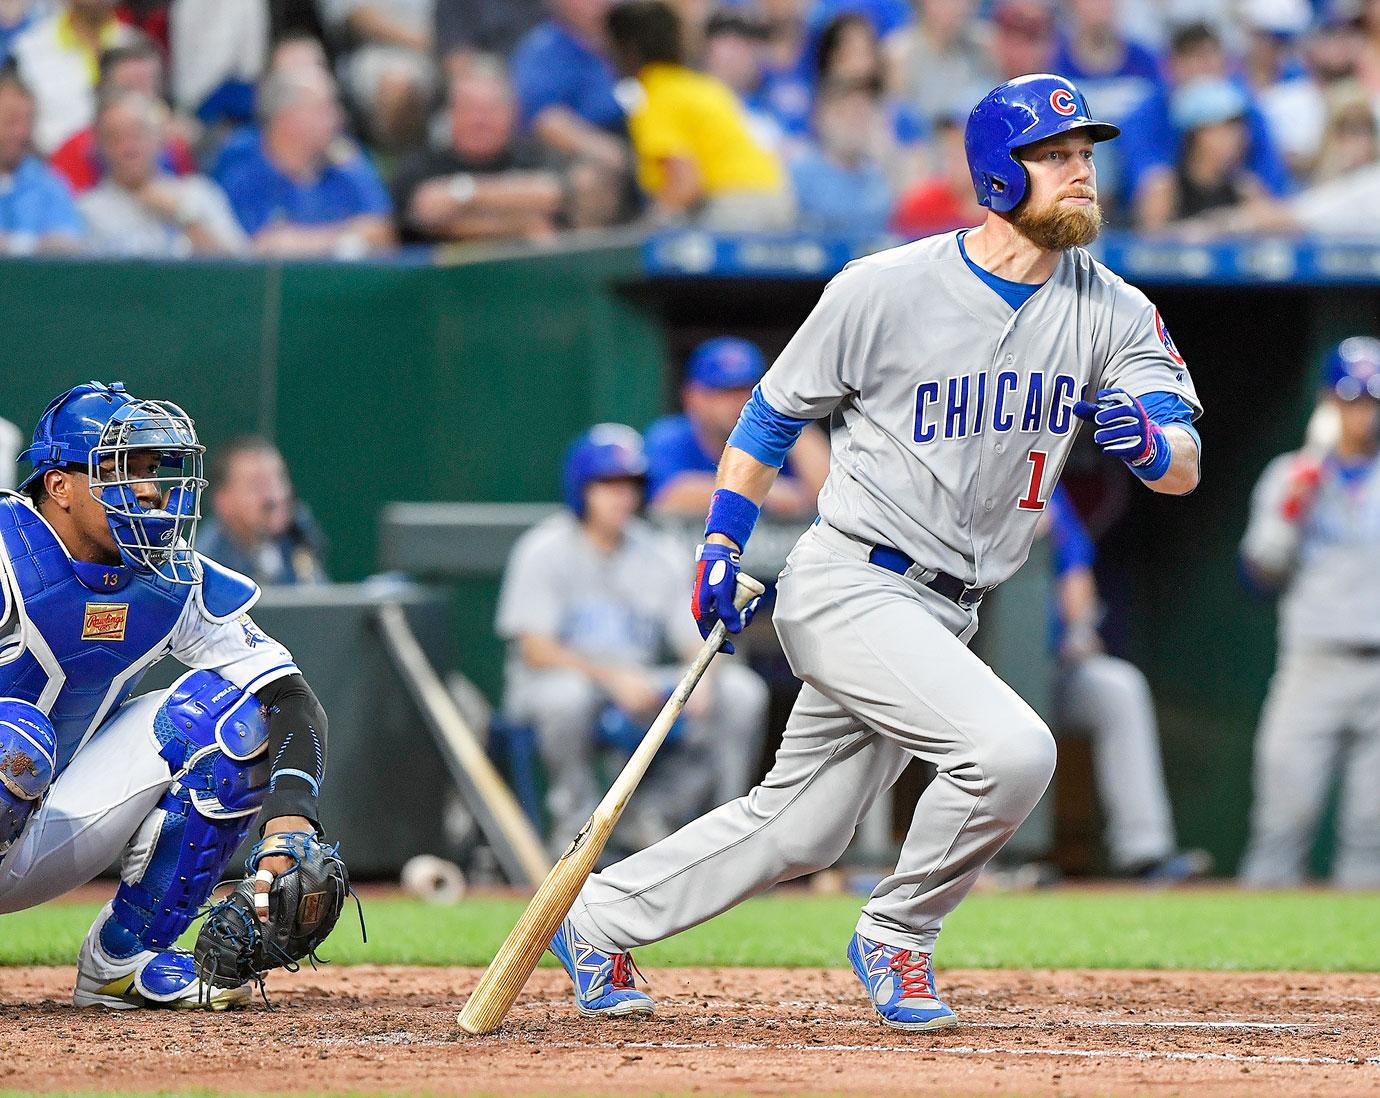 Ex-Cubs Ben Zobrist's Wife Julianna Wants Half His Money Plus $4 Million He  Forfeited When He Left The Team After She Cheated With Their Pastor Byron  Yawn - Page 3 of 5 - BlackSportsOnline